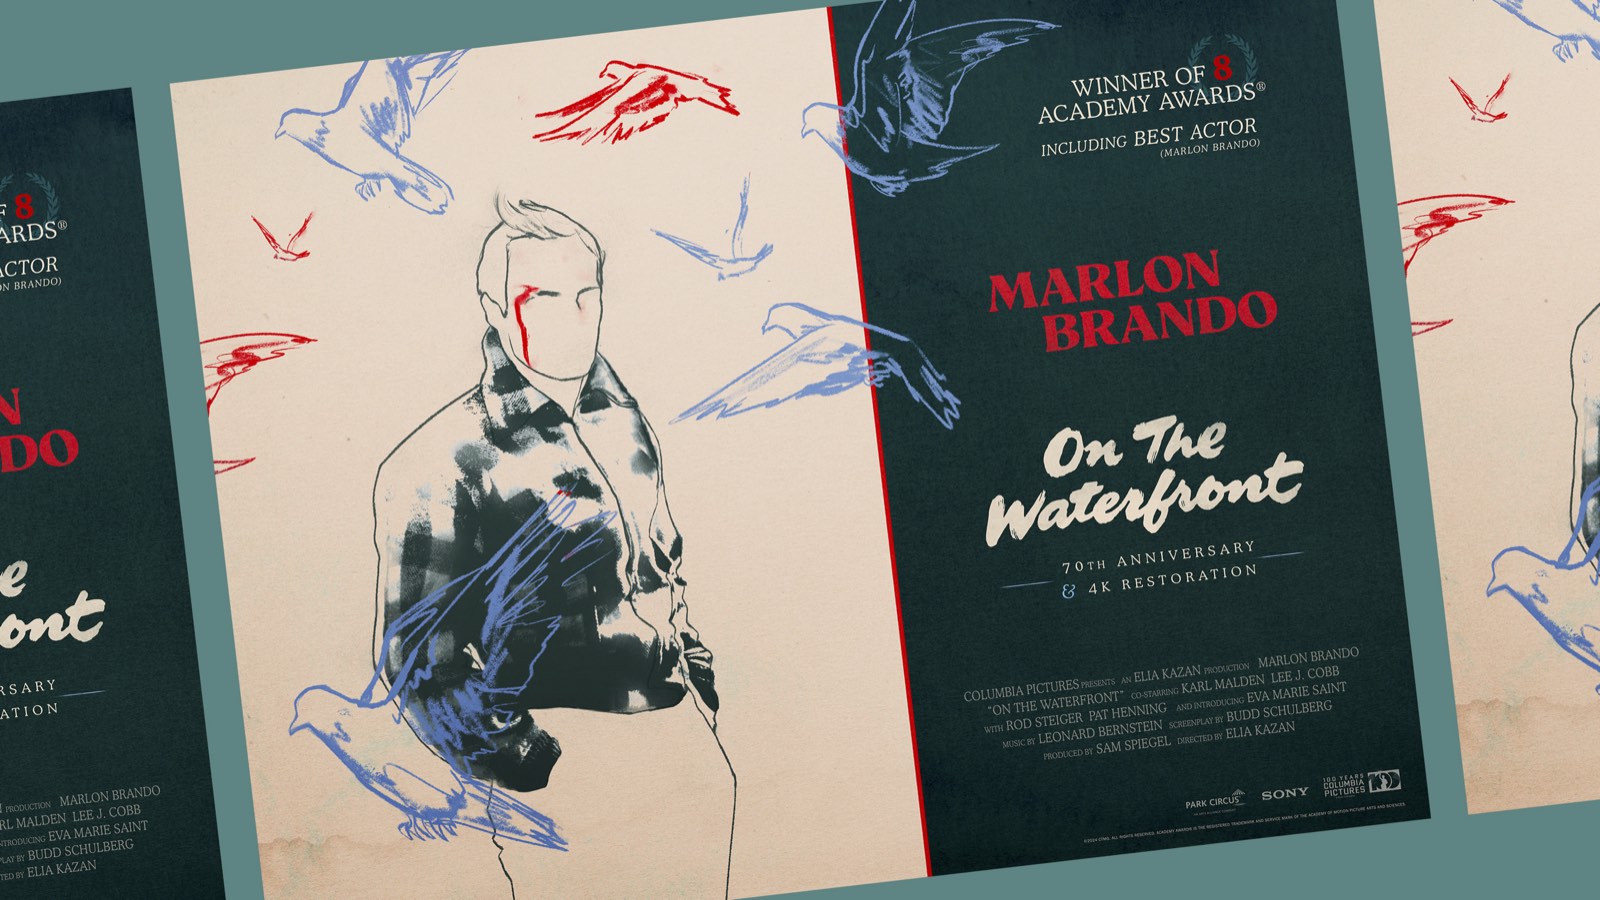 Brand new artwork revealed for On the Waterfront's 70th anniversary